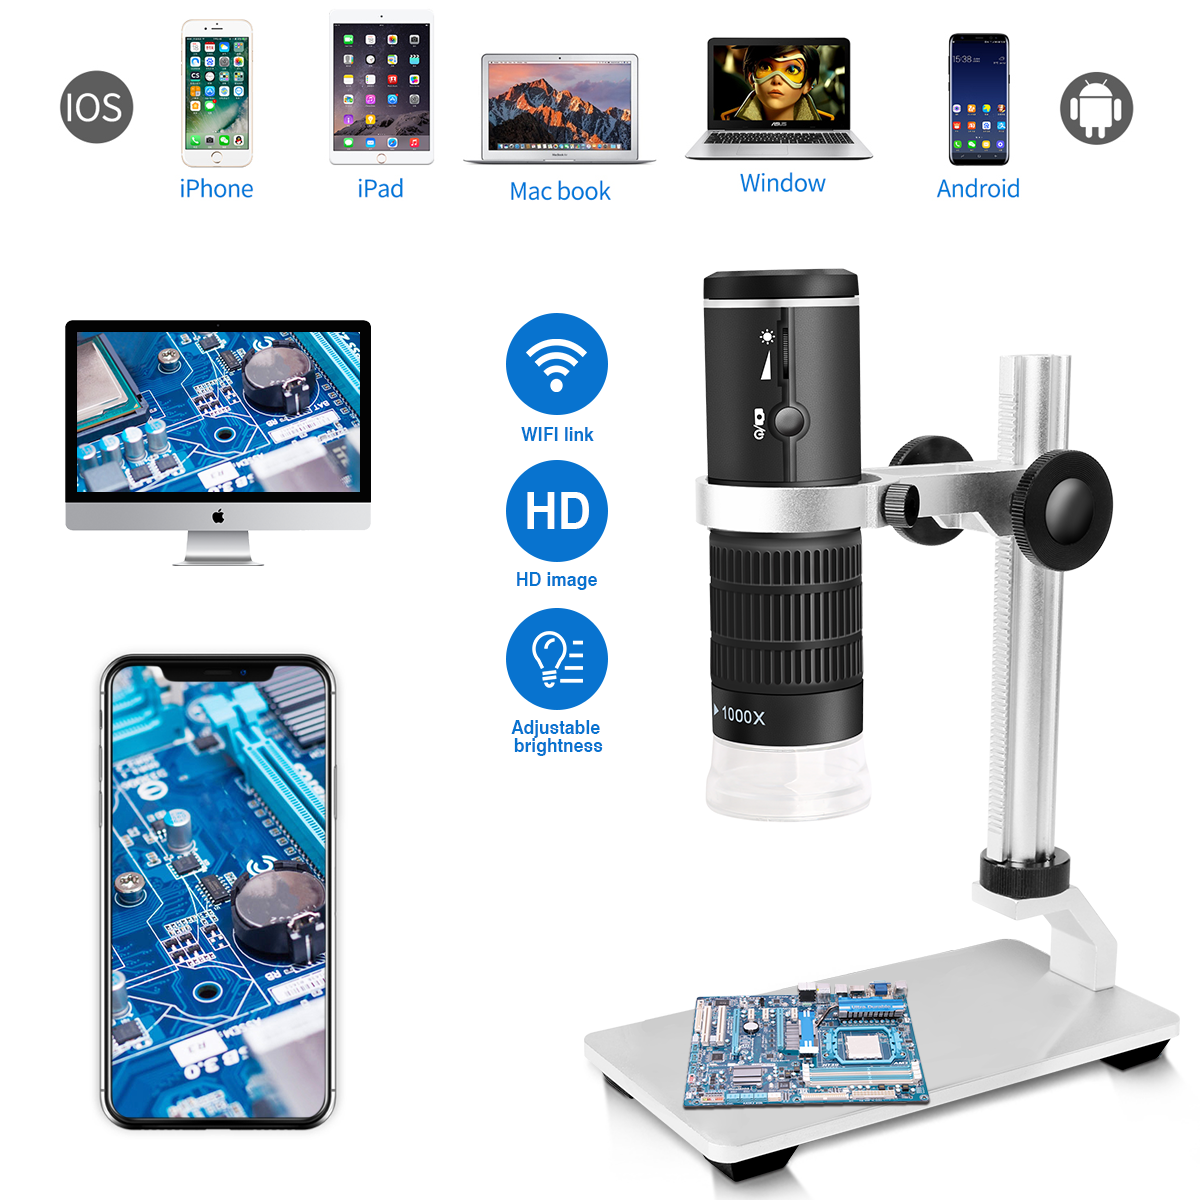 Jiusion WiFi USB Digital Handheld Microscope Compatible with iPhone iPad Mac Window Android Jiusion-WifiMicroscope 40 to 1000x Wireless Magnification Endoscope 8 LED Mini Camera with Phone Suction Metal Stand and Case